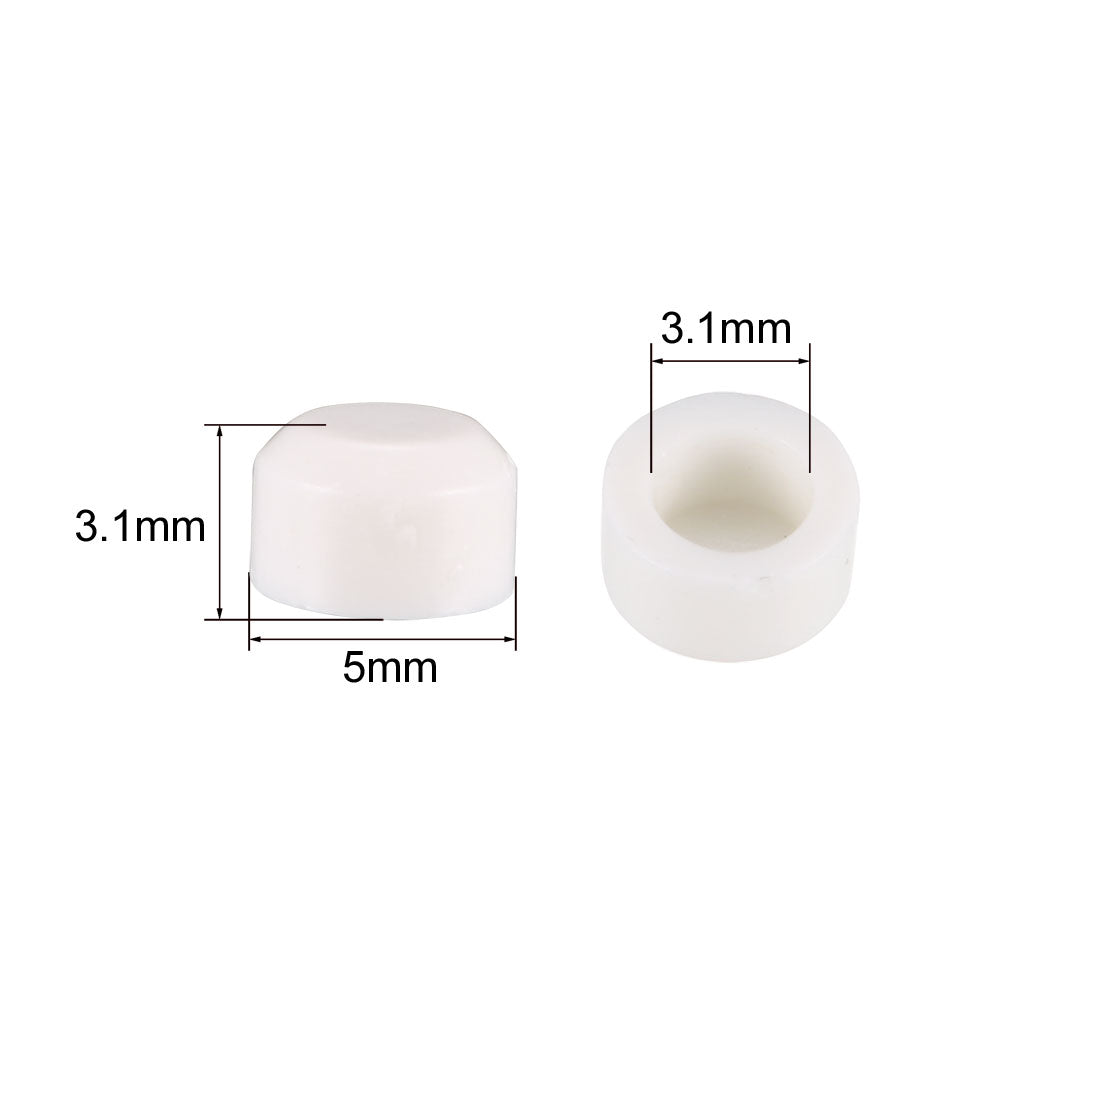 uxcell Uxcell 25pcs 3.1mm Hole Dia Plastic Pushbutton Tactile Switch Caps Cover Keycaps Protector White for 6x6 Tact Switch